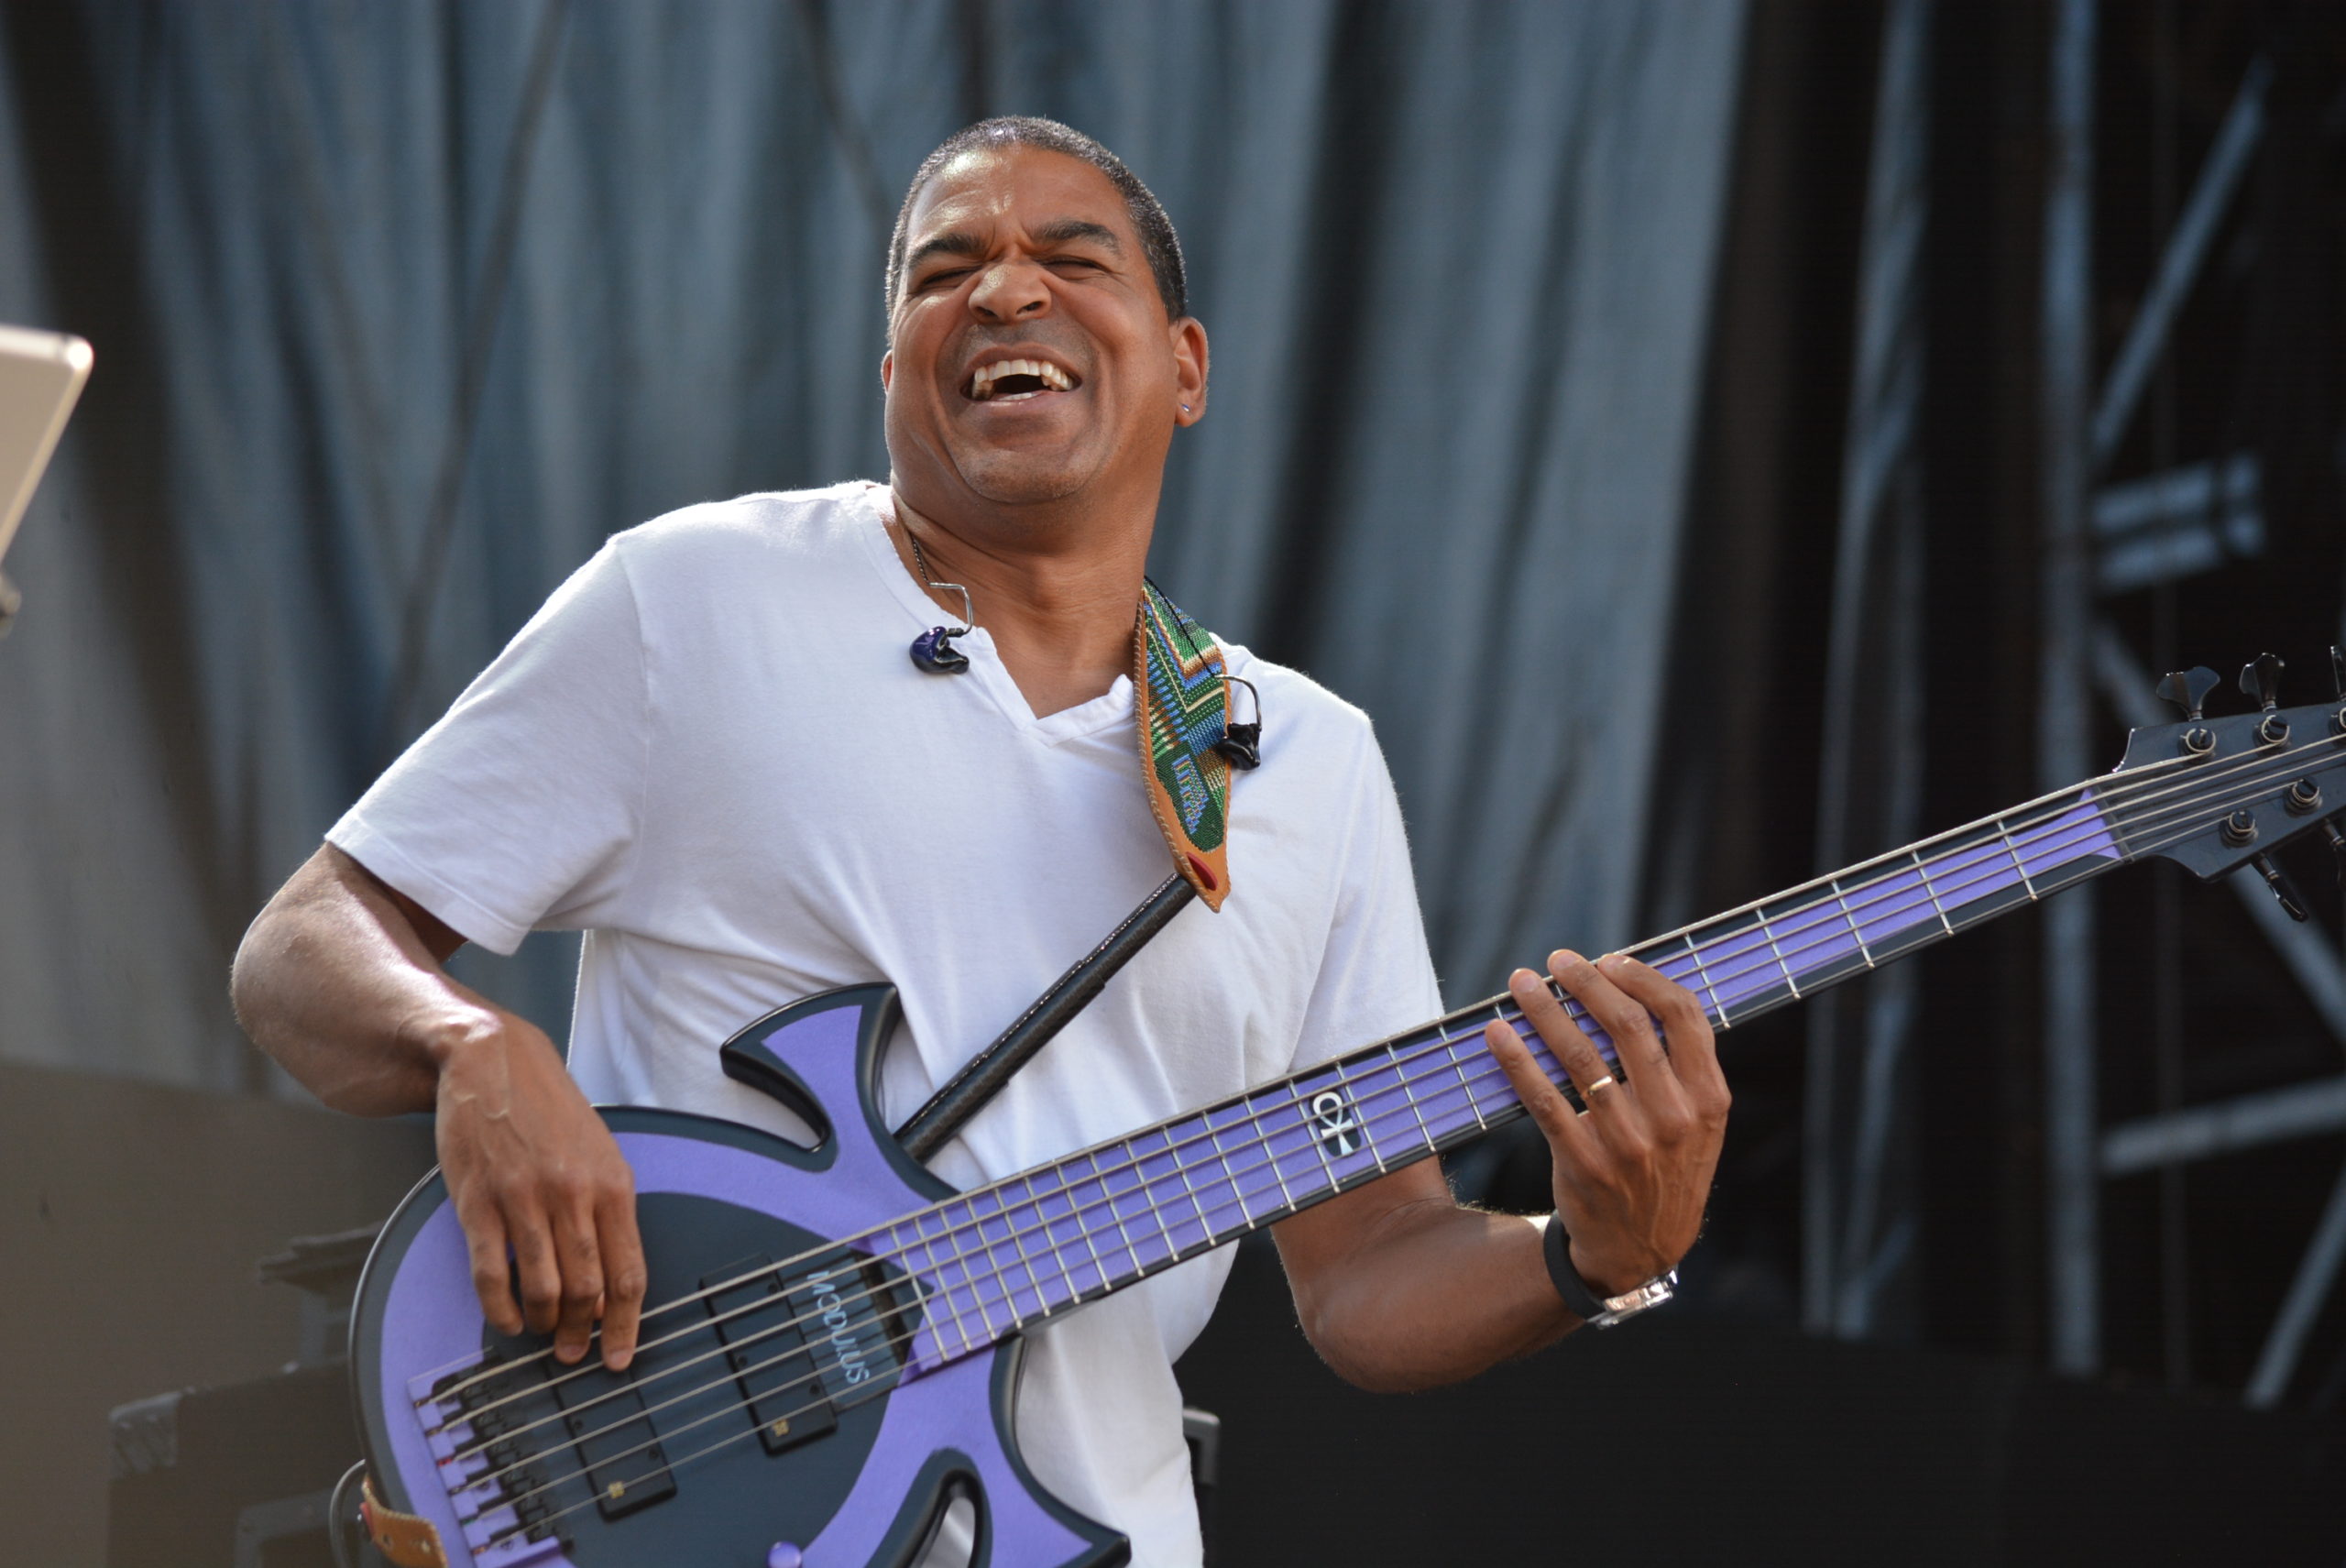 The Space Between The Notes: Oteil Burbridge on ‘Comes A Time,’ Dead & Company and Col. Bruce’s Clairvoyance